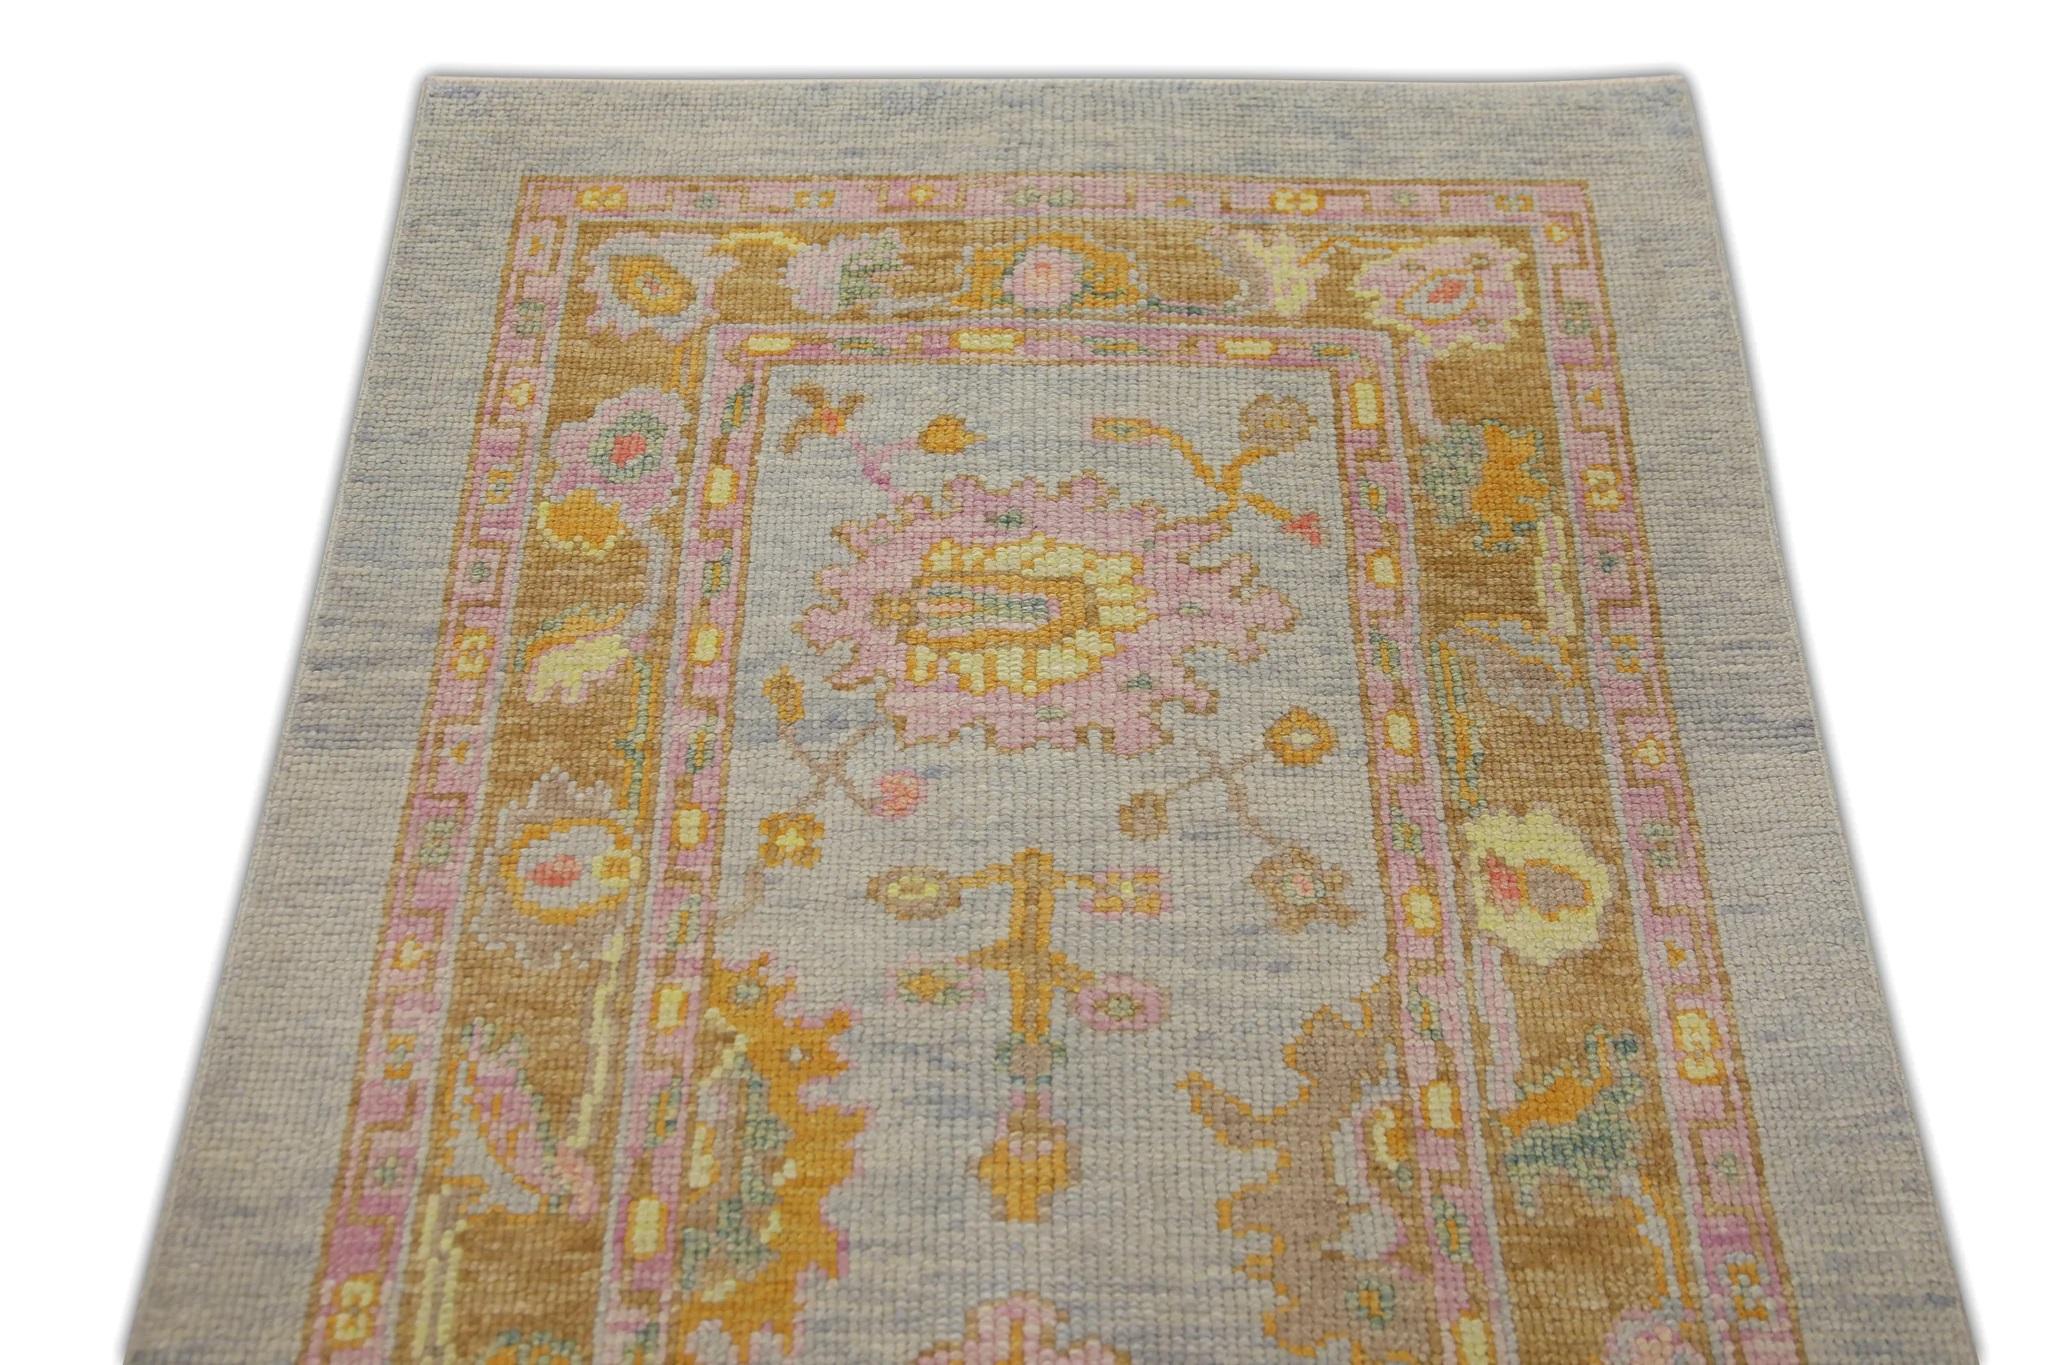 Floral Design Handwoven Wool Turkish Oushak Rug in Blue and Pink 3' x 8'4